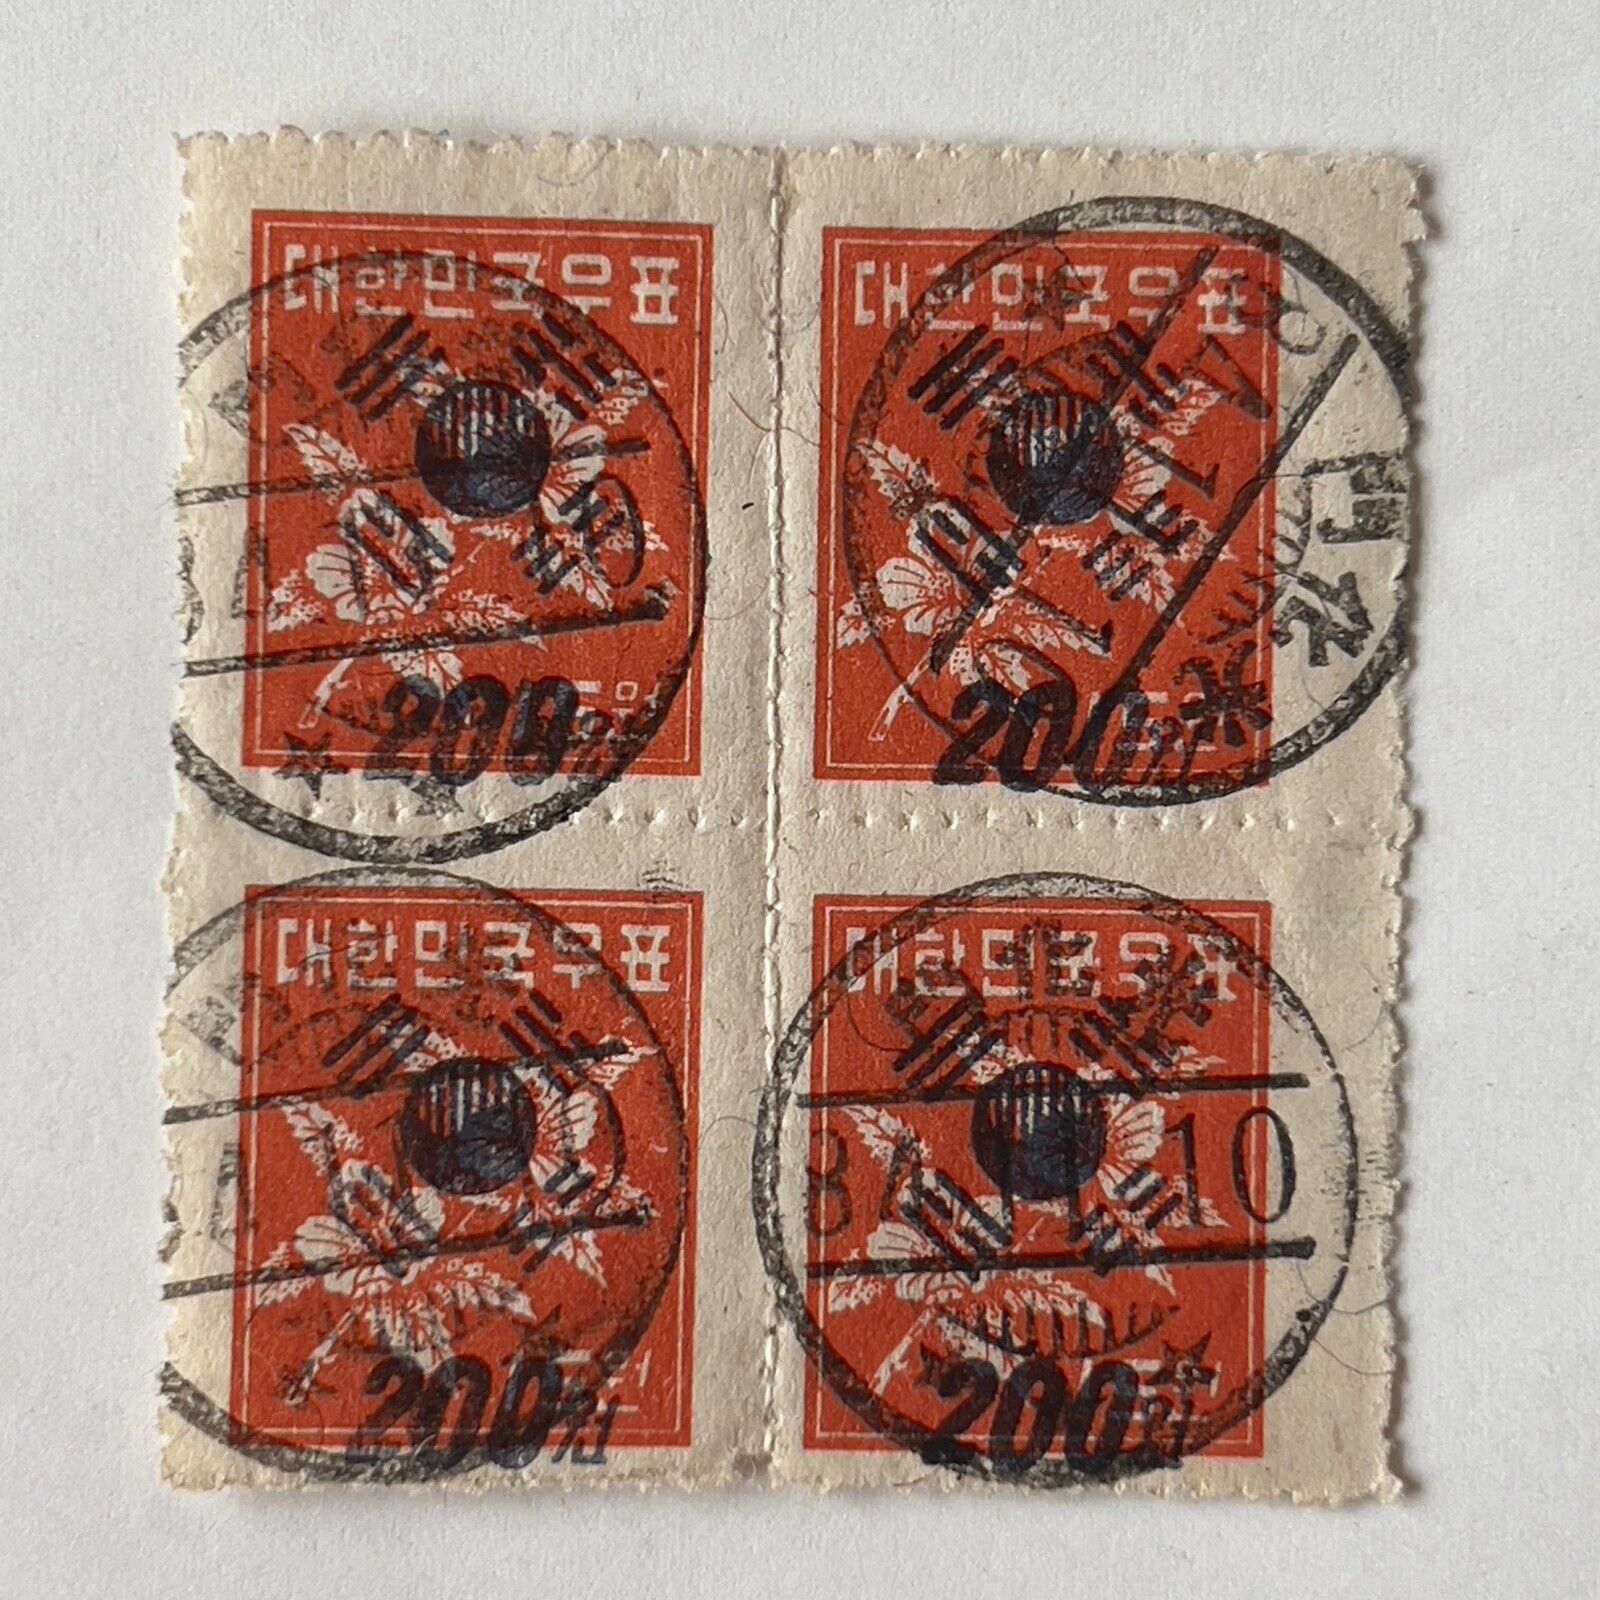 1951 SOUTH KOREA BLOCK OF 4 STAMPS #128 HIBISCUS BOLD OVERPRINT NICE SON CANCELS